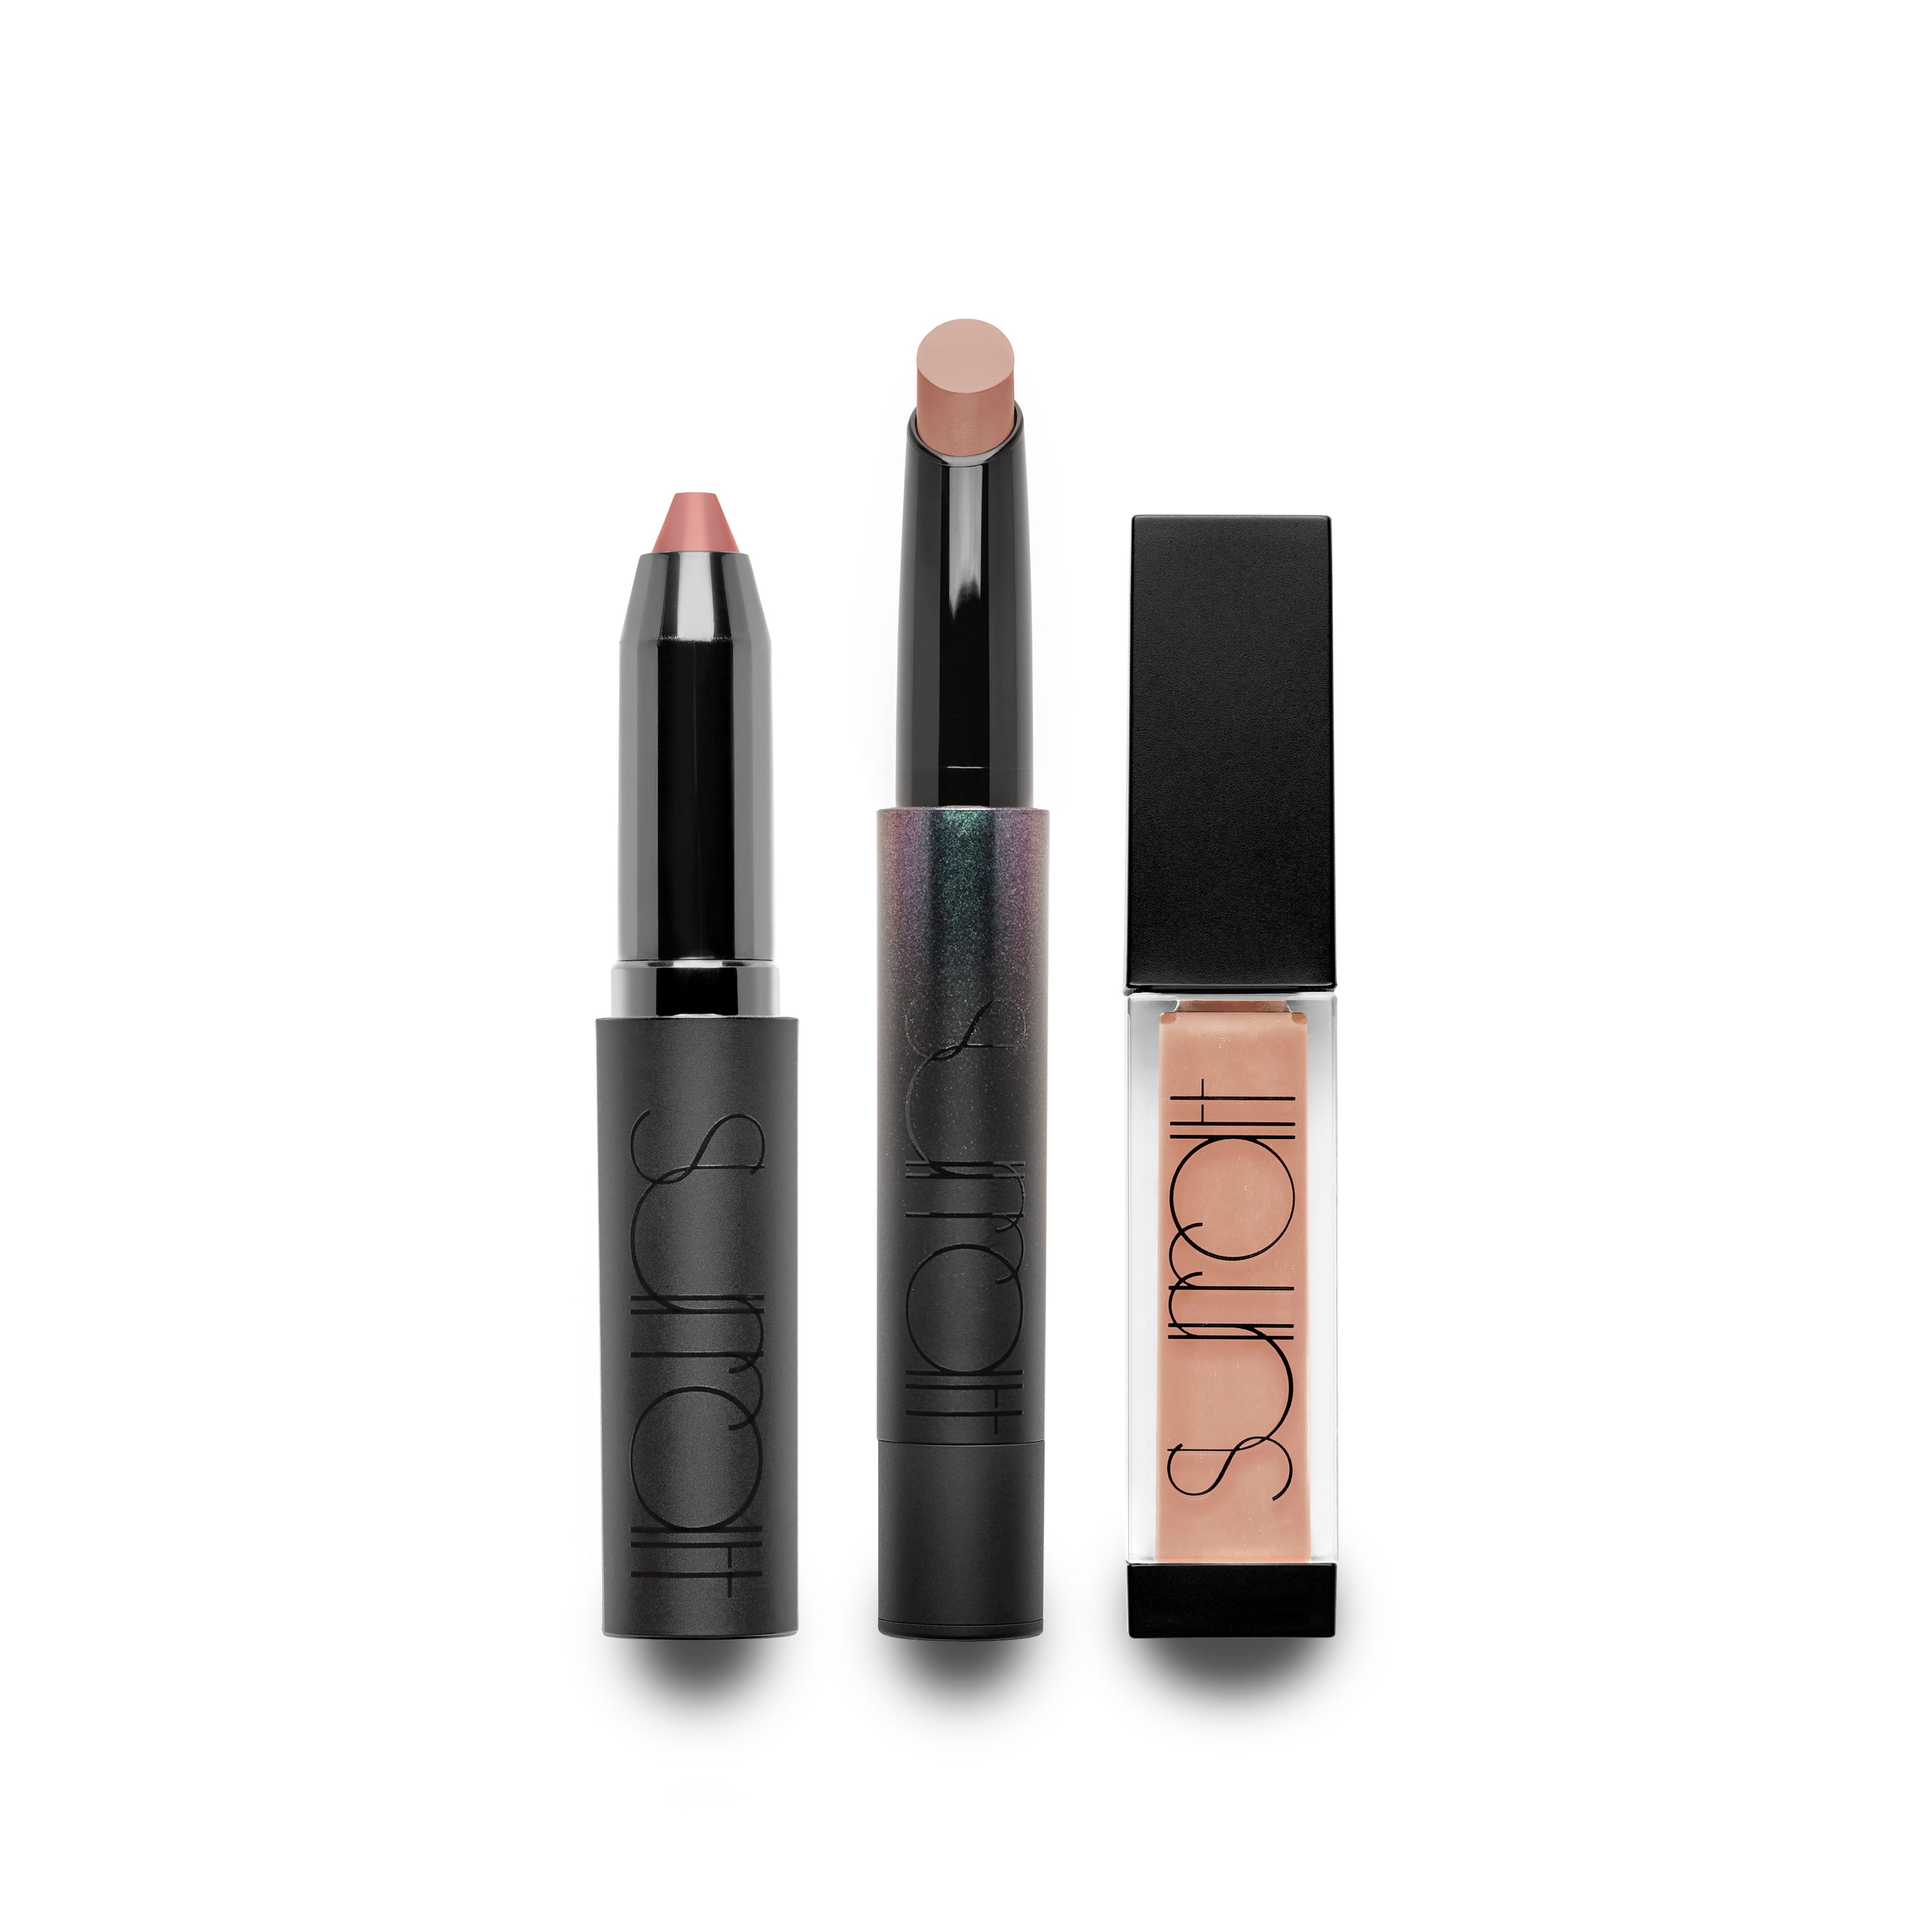 Les Nus - Automatique Lip Crayon in matte rosy taupe shade, Lipslique in peachy beige shade, Lip Lustre in peachy gold shade.